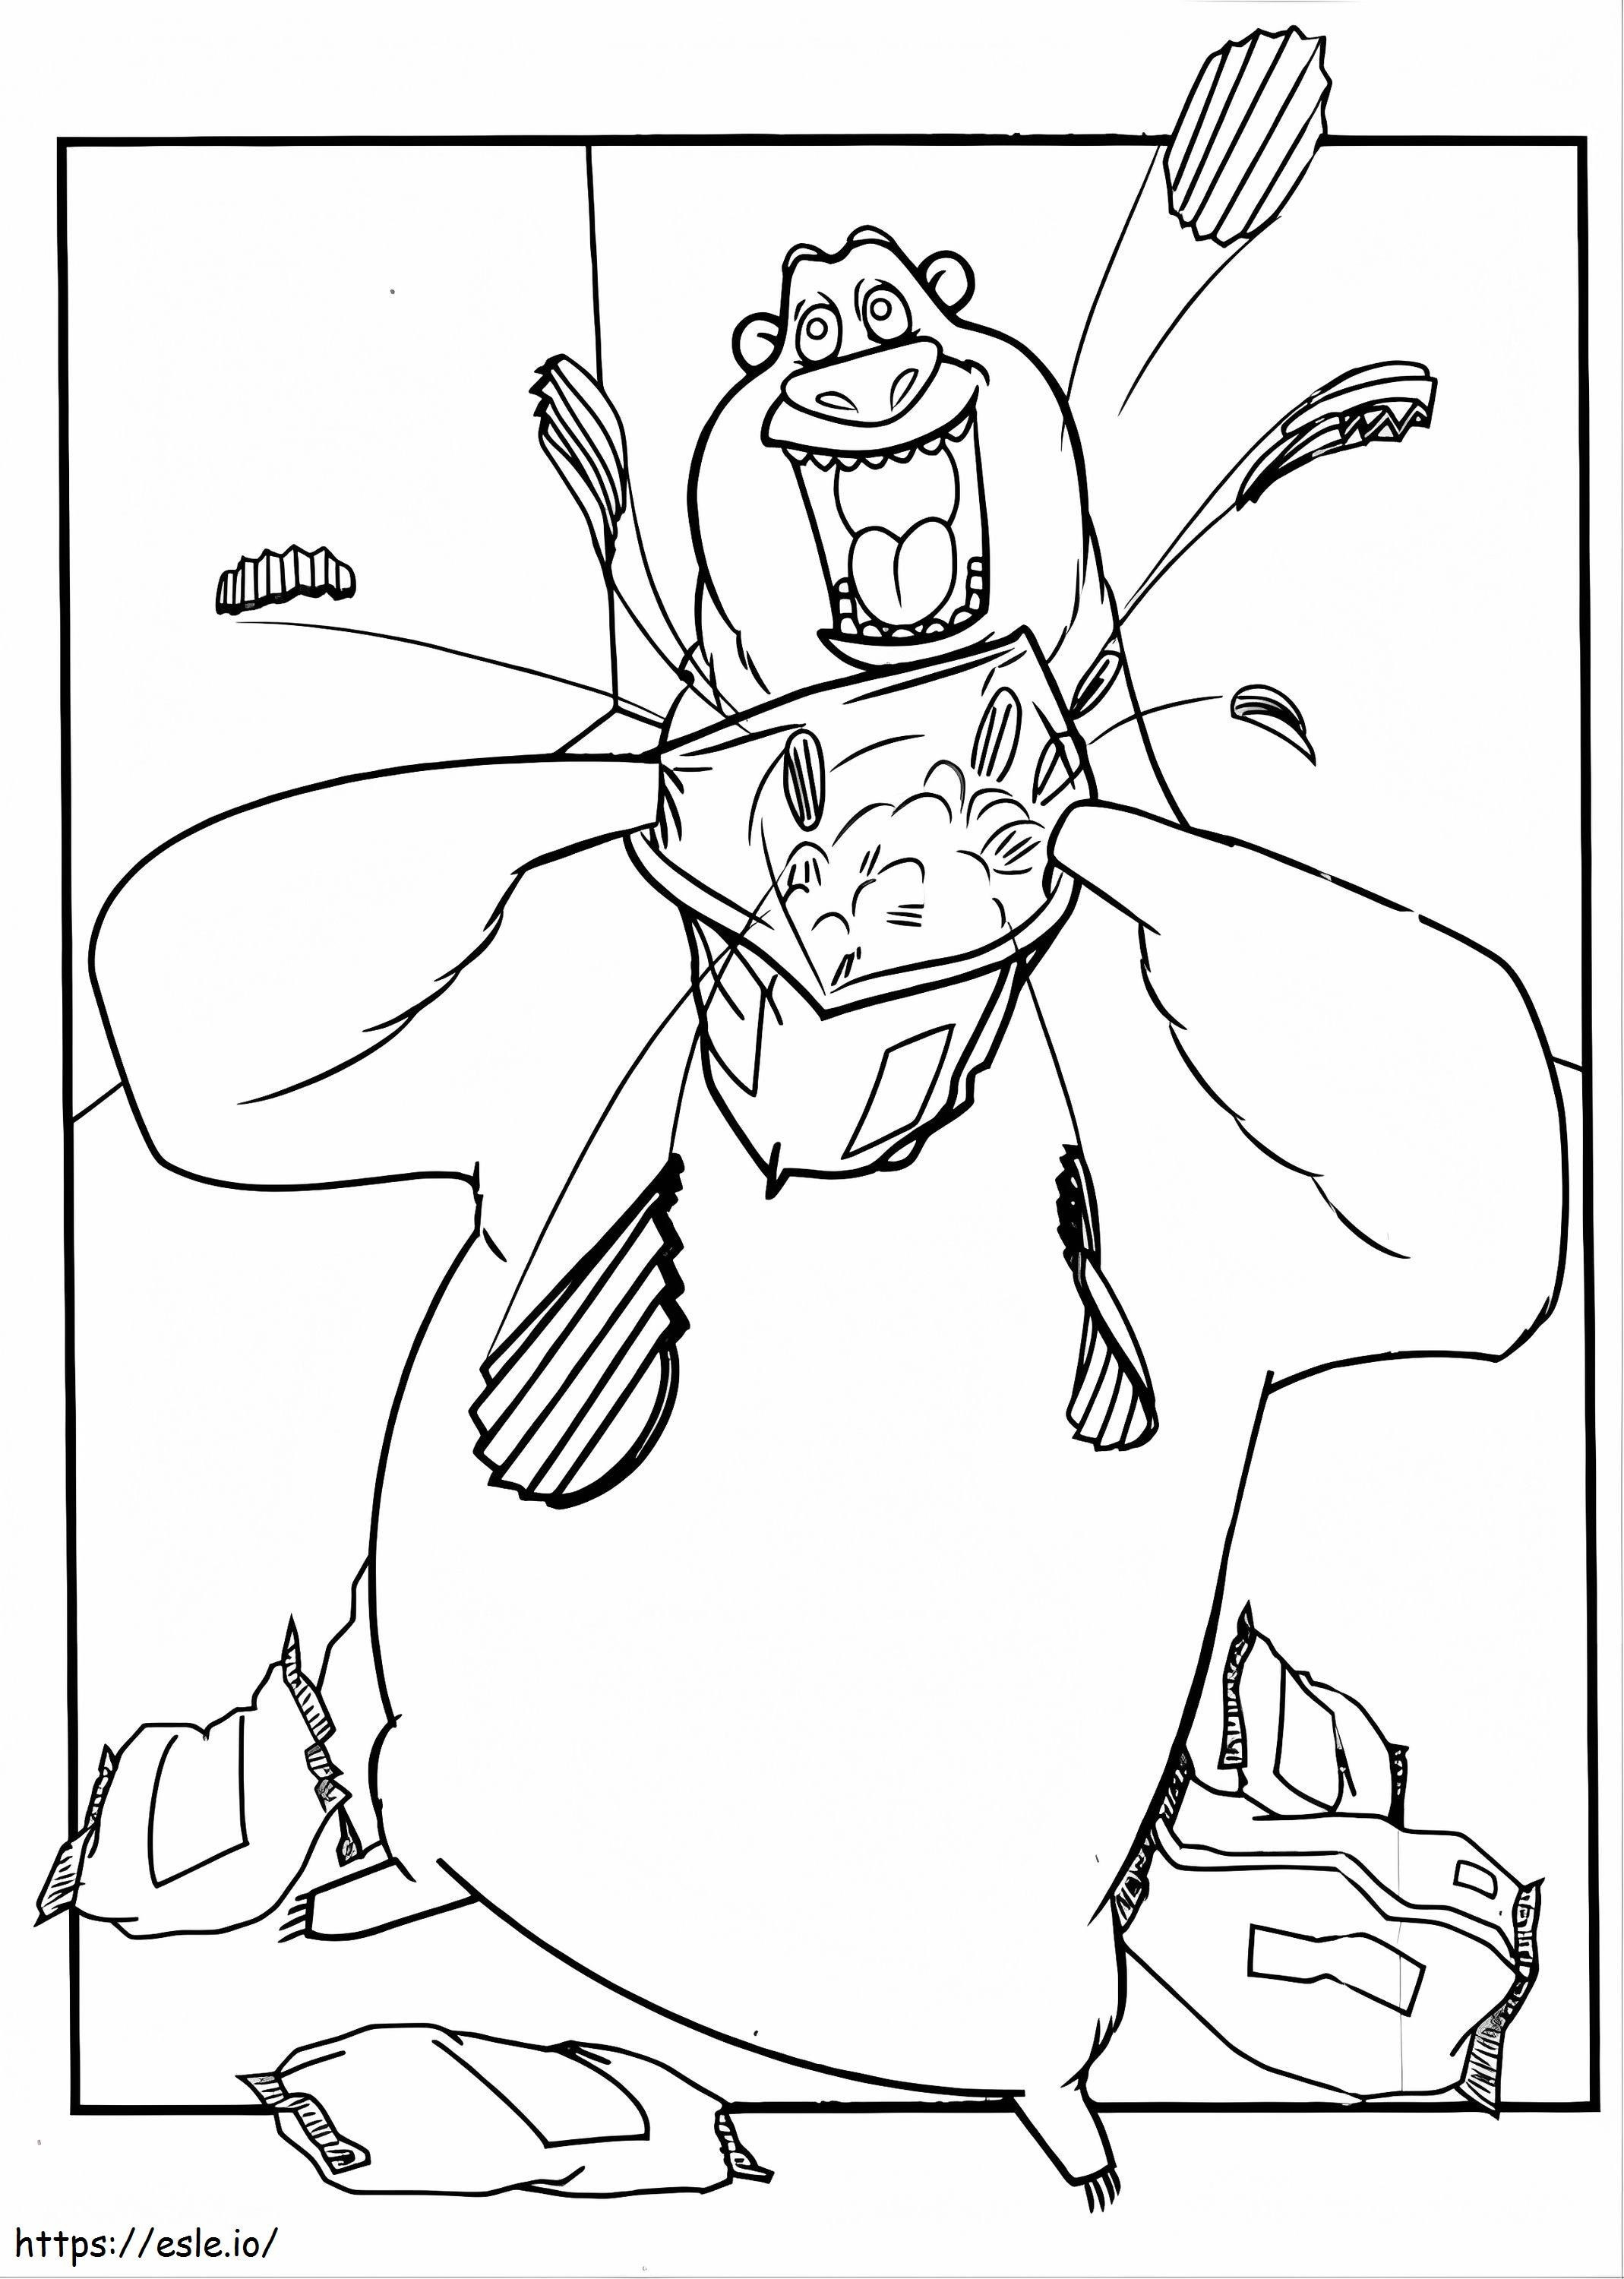 Crazy Bow coloring page